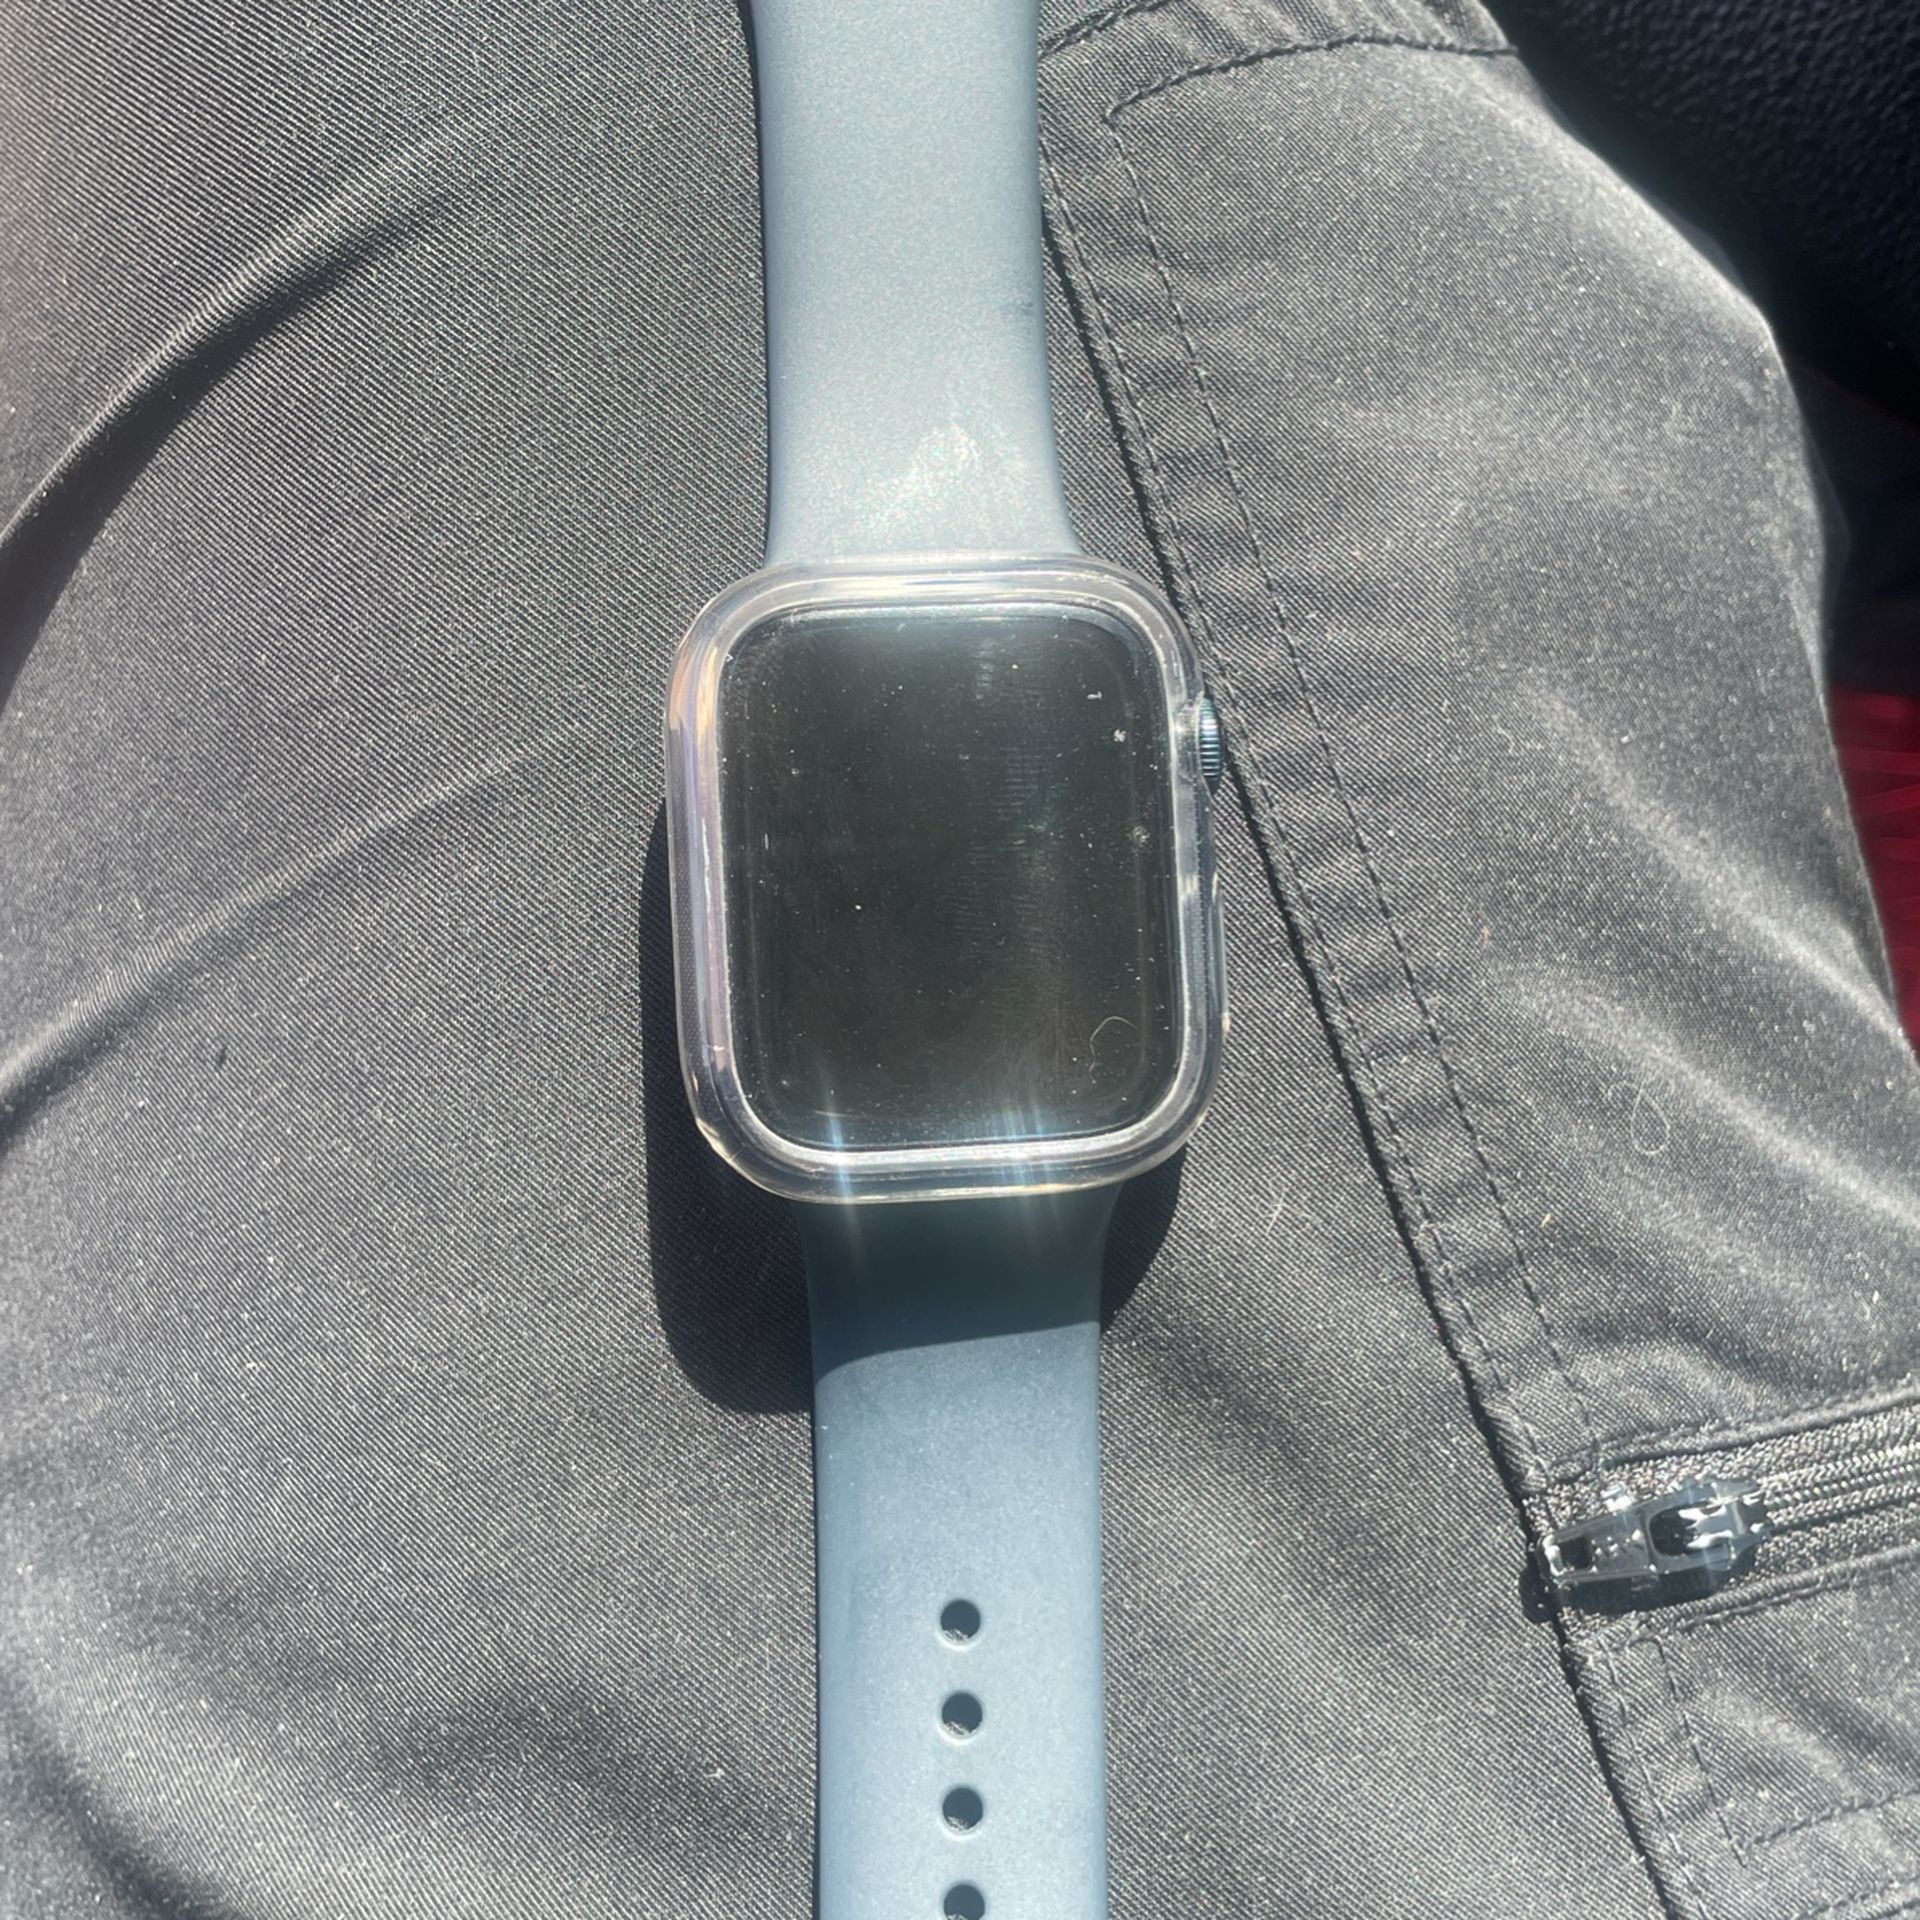 Series 9 Apple Watch For Sale